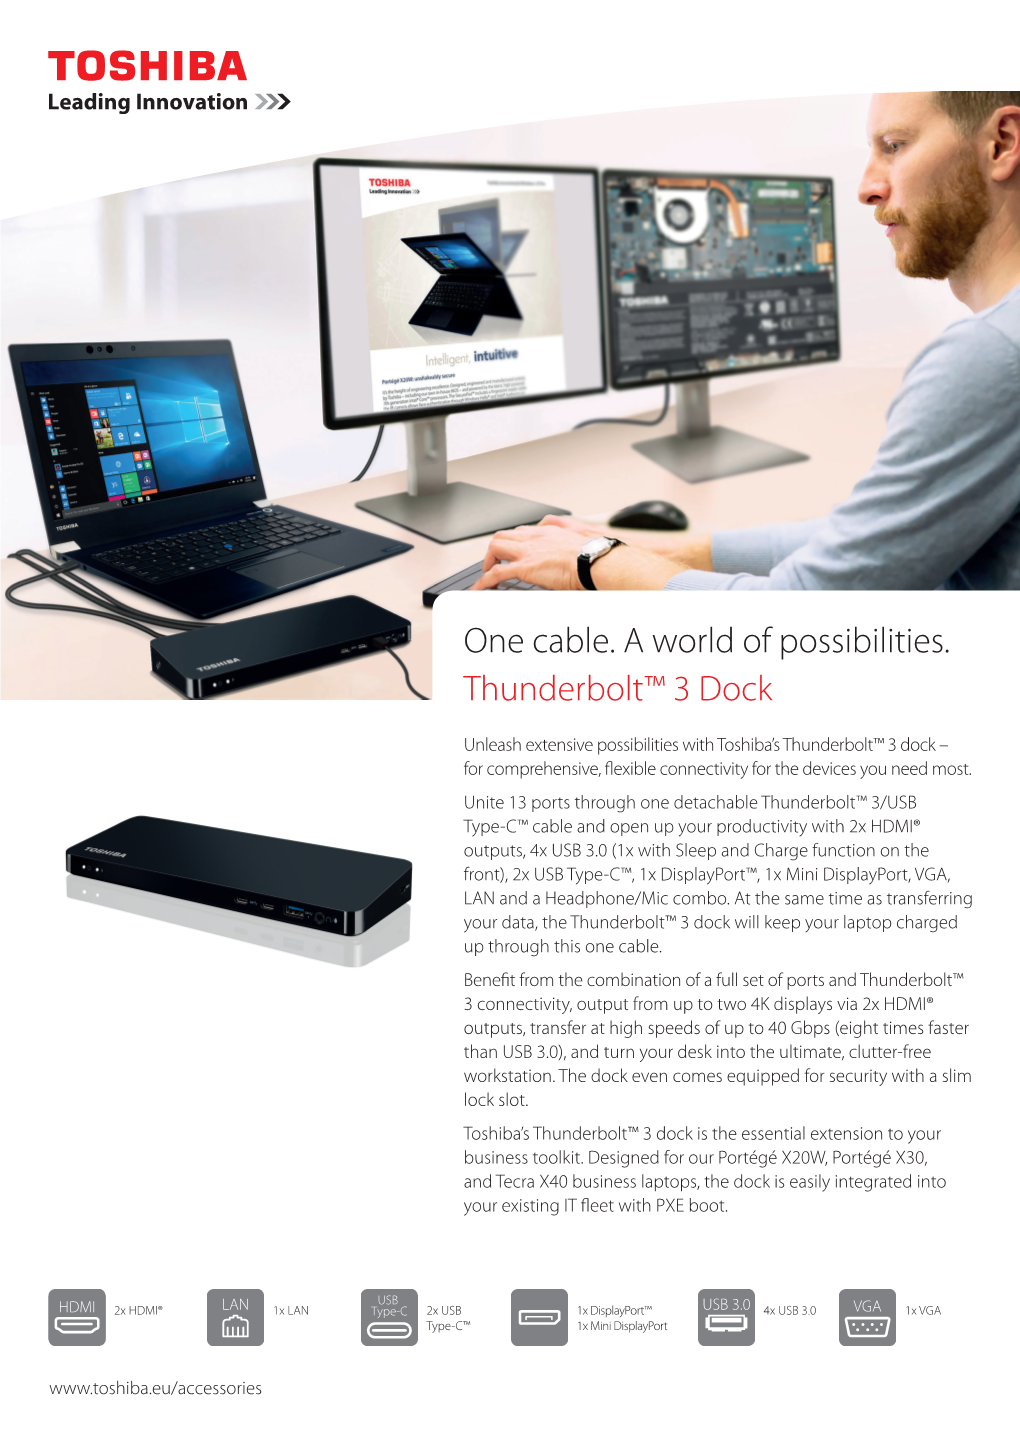 One Cable. a World of Possibilities. Thunderbolt™ 3 Dock